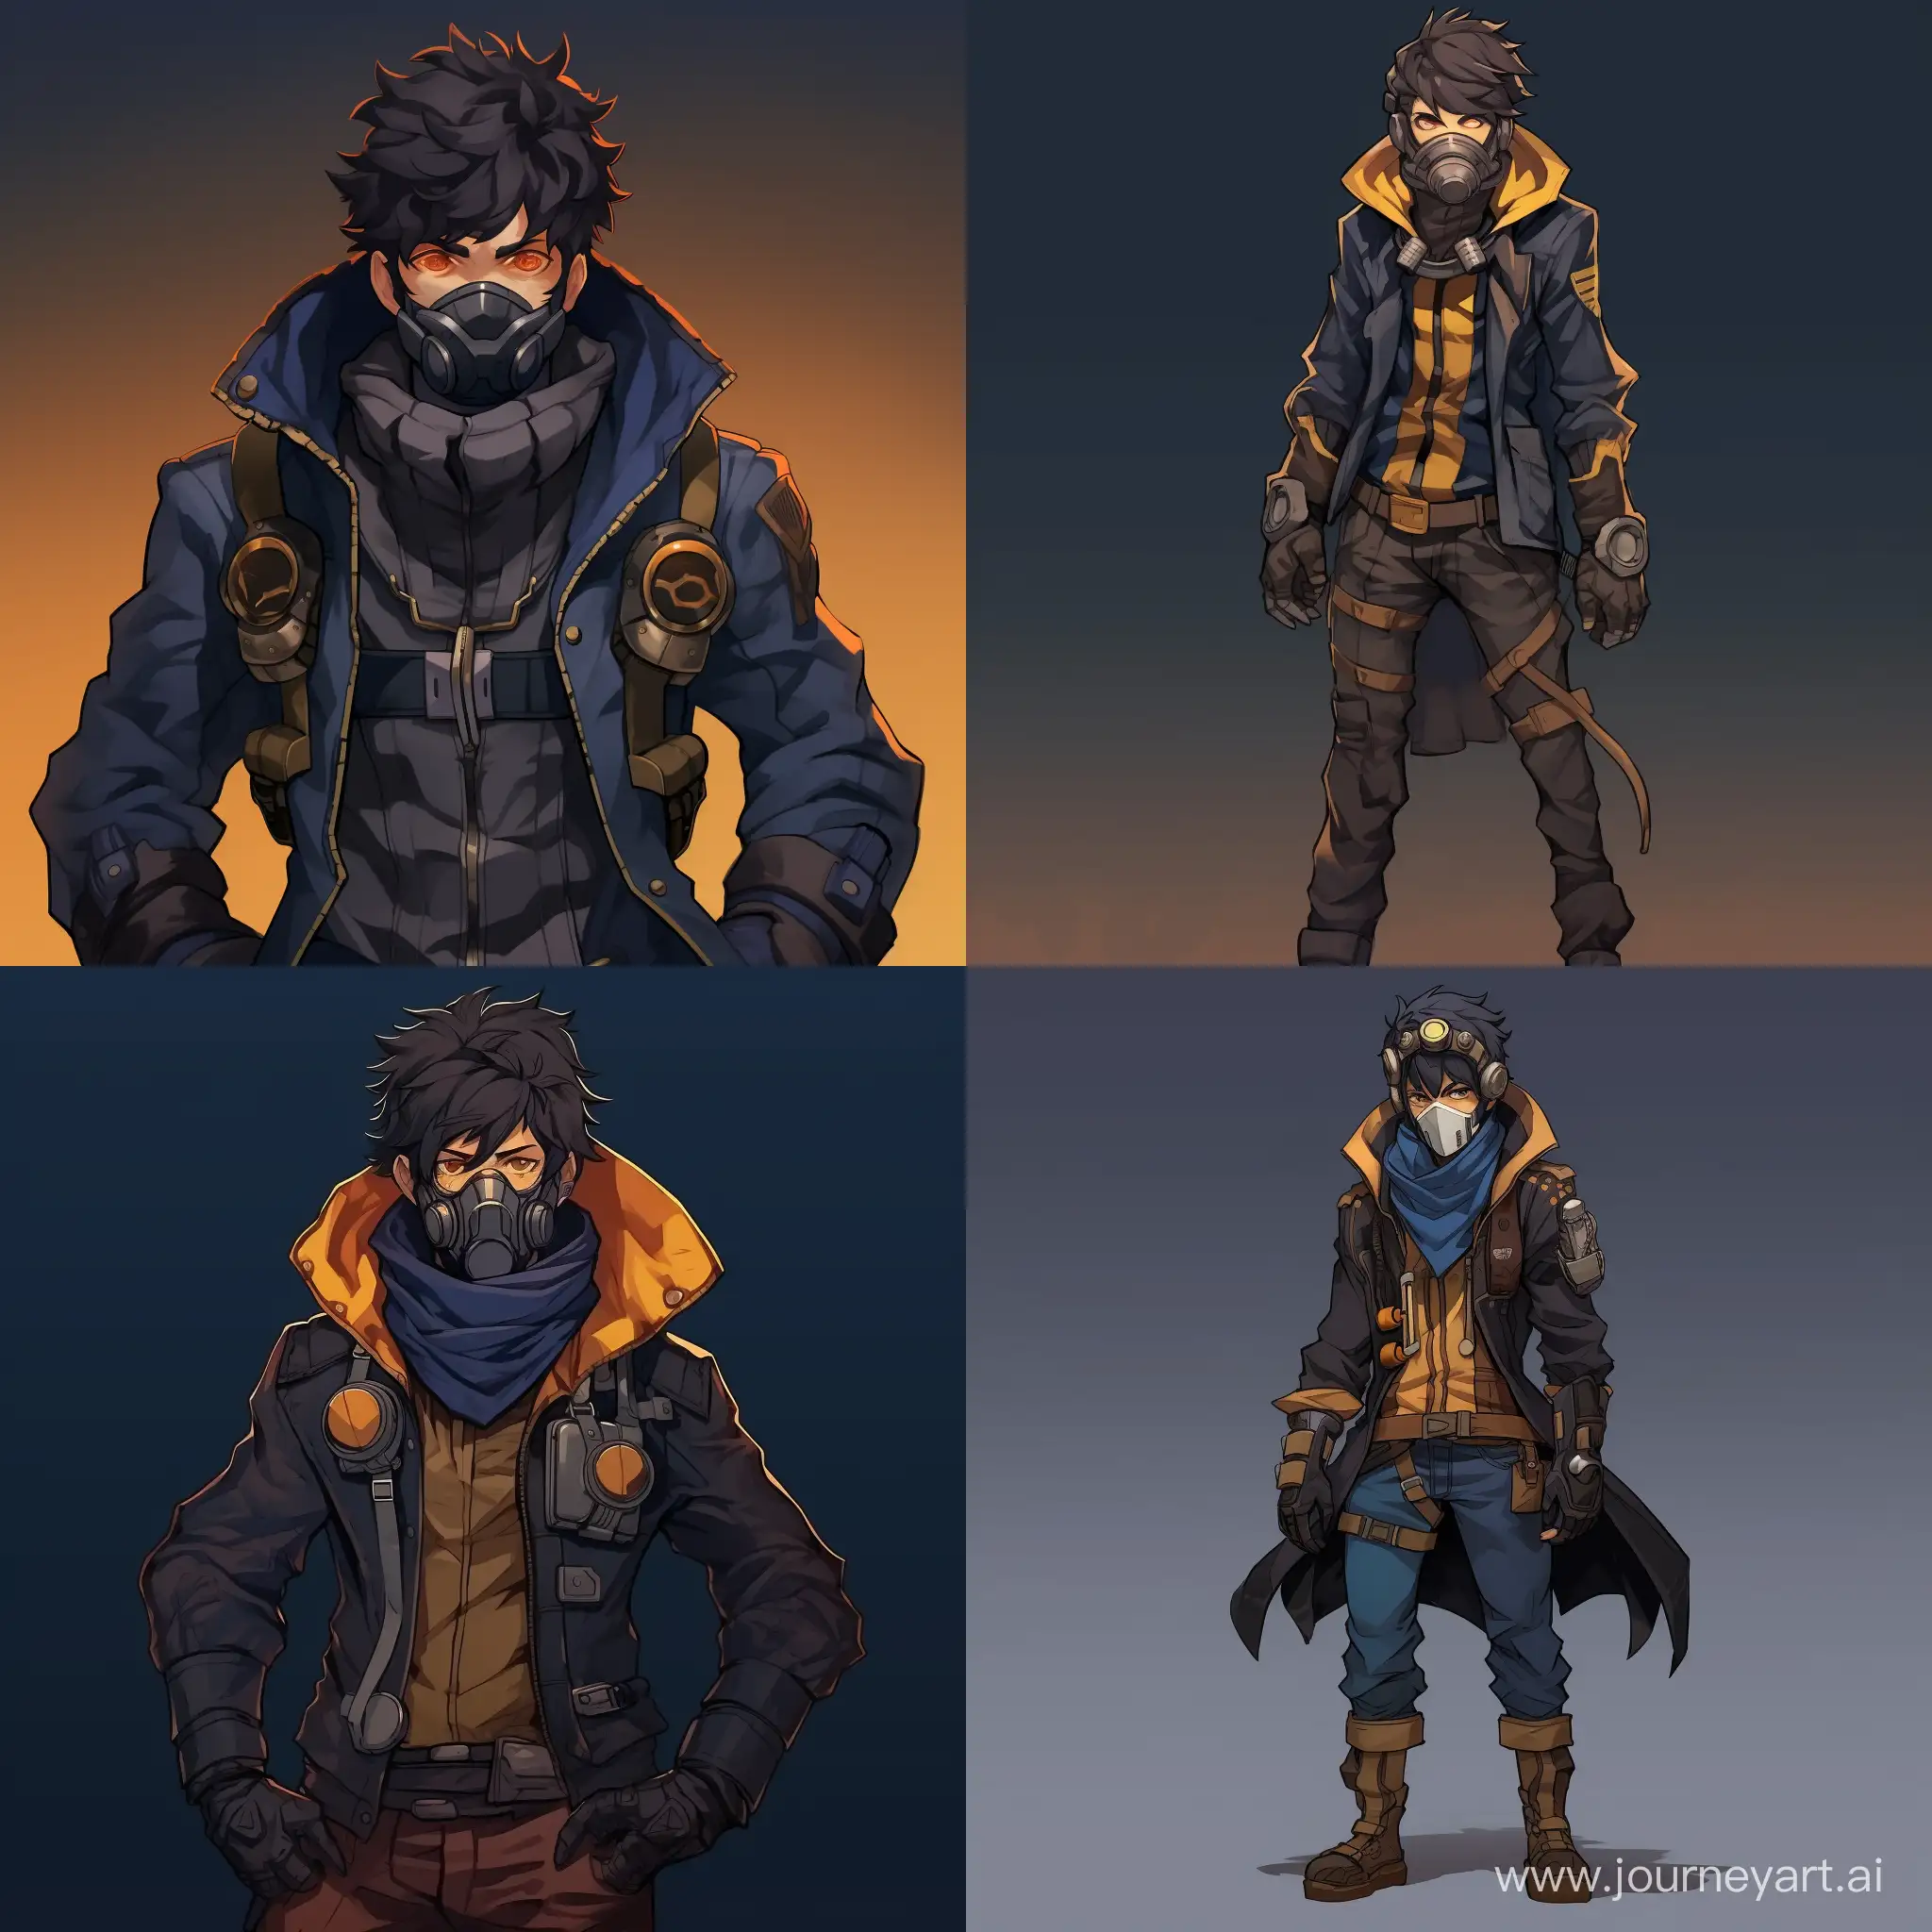 In the style of anime, in full growth. A young engineer-scientist with a strong physique. He wears a gas mask with double-filtered, amber-colored lenses. Dressed in a dark blue warm jacket with a hood with fur trim and dark blue jeans. He also wears gray gloves and black combat boots.